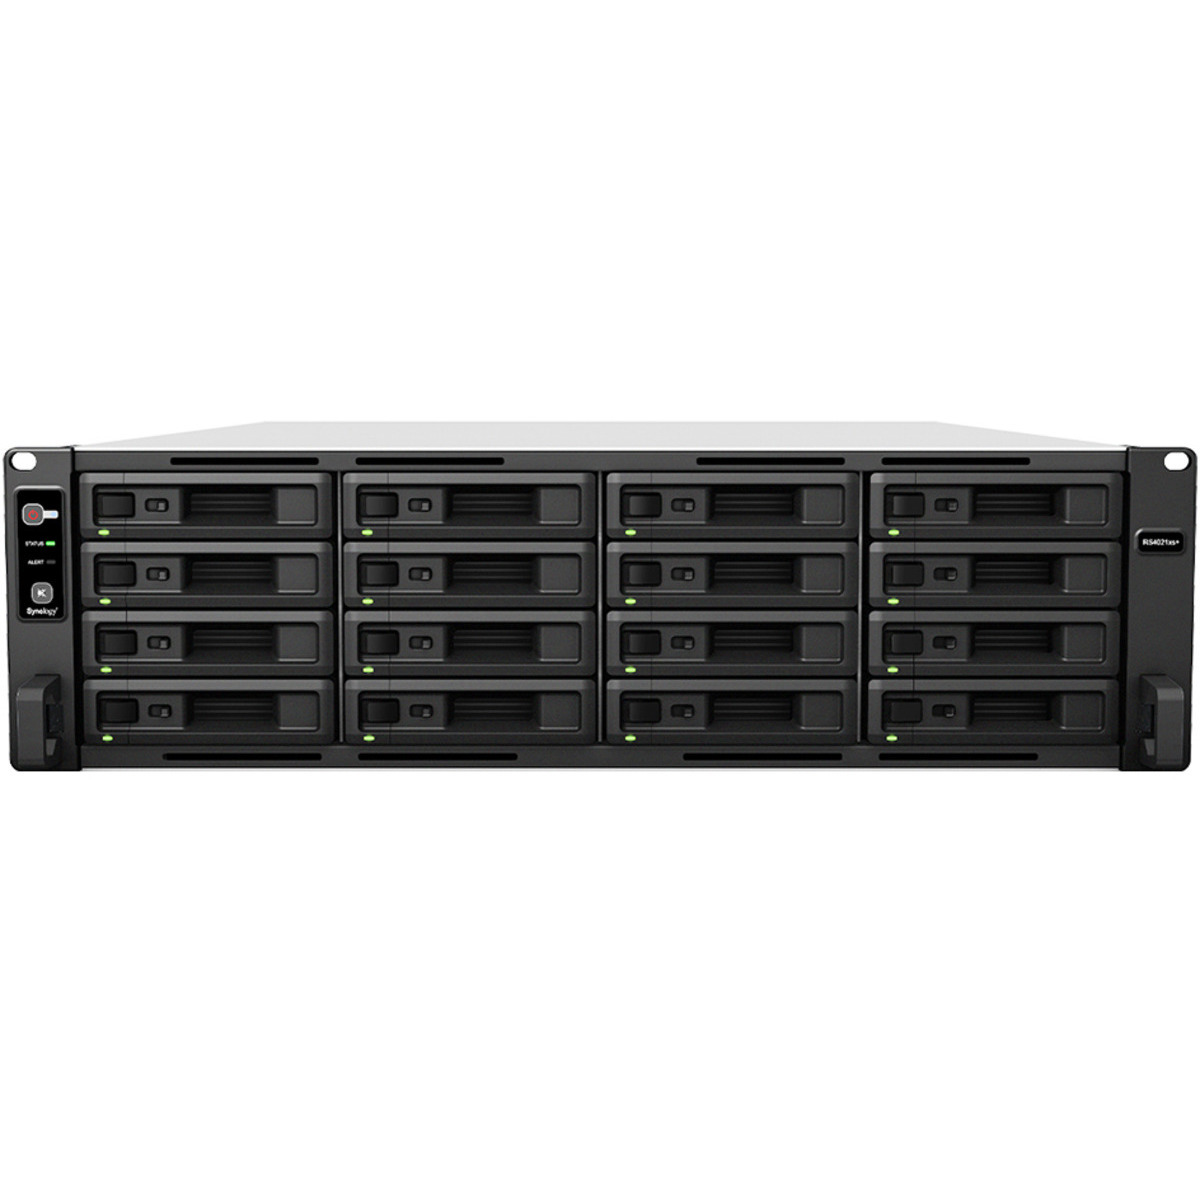 buy $10594 Synology RackStation RS4021xs+ 128tb RackMount NAS - Network Attached Storage Device 16x8000gb Toshiba Enterprise Capacity MG08ADA800E 3.5 7200rpm SATA 6Gb/s HDD ENTERPRISE Class Drives Installed - Burn-In Tested - ON SALE - nas headquarters buy network attached storage server device das new raid-5 free shipping usa christmas new year holiday sale RackStation RS4021xs+